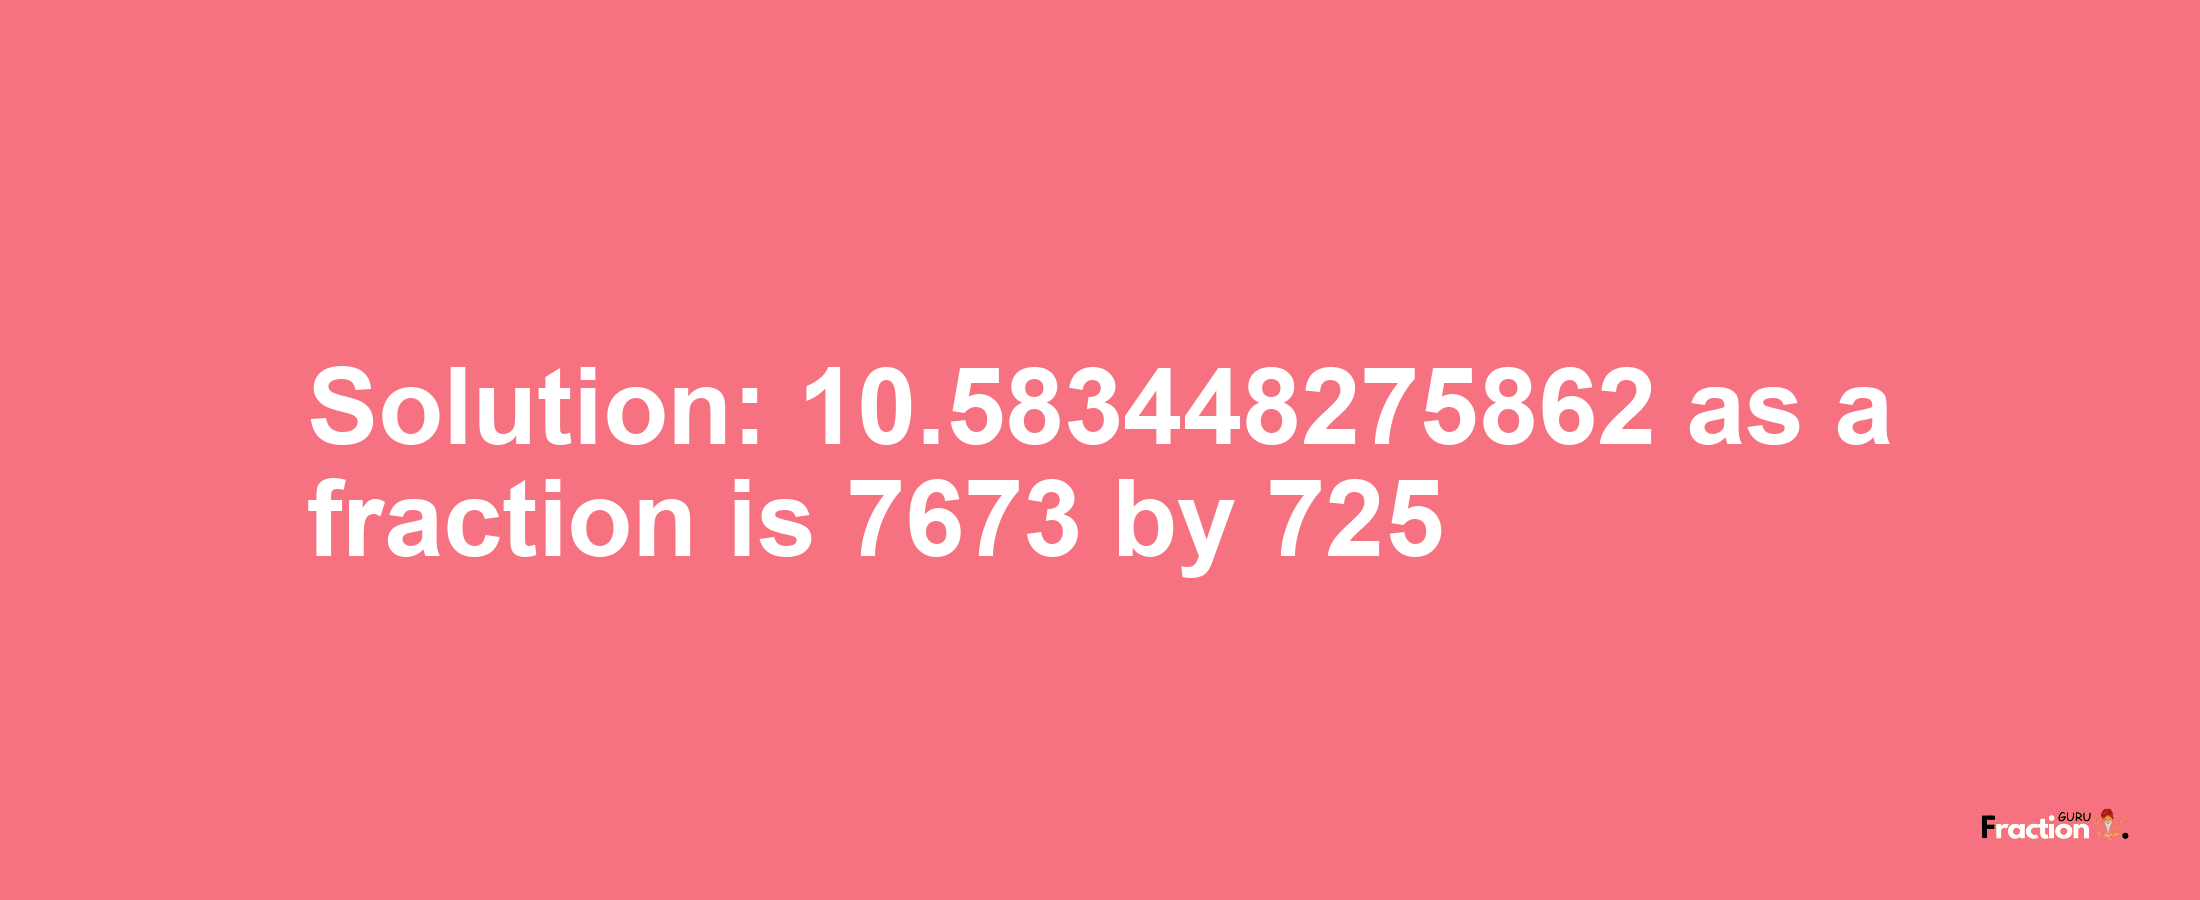 Solution:10.583448275862 as a fraction is 7673/725